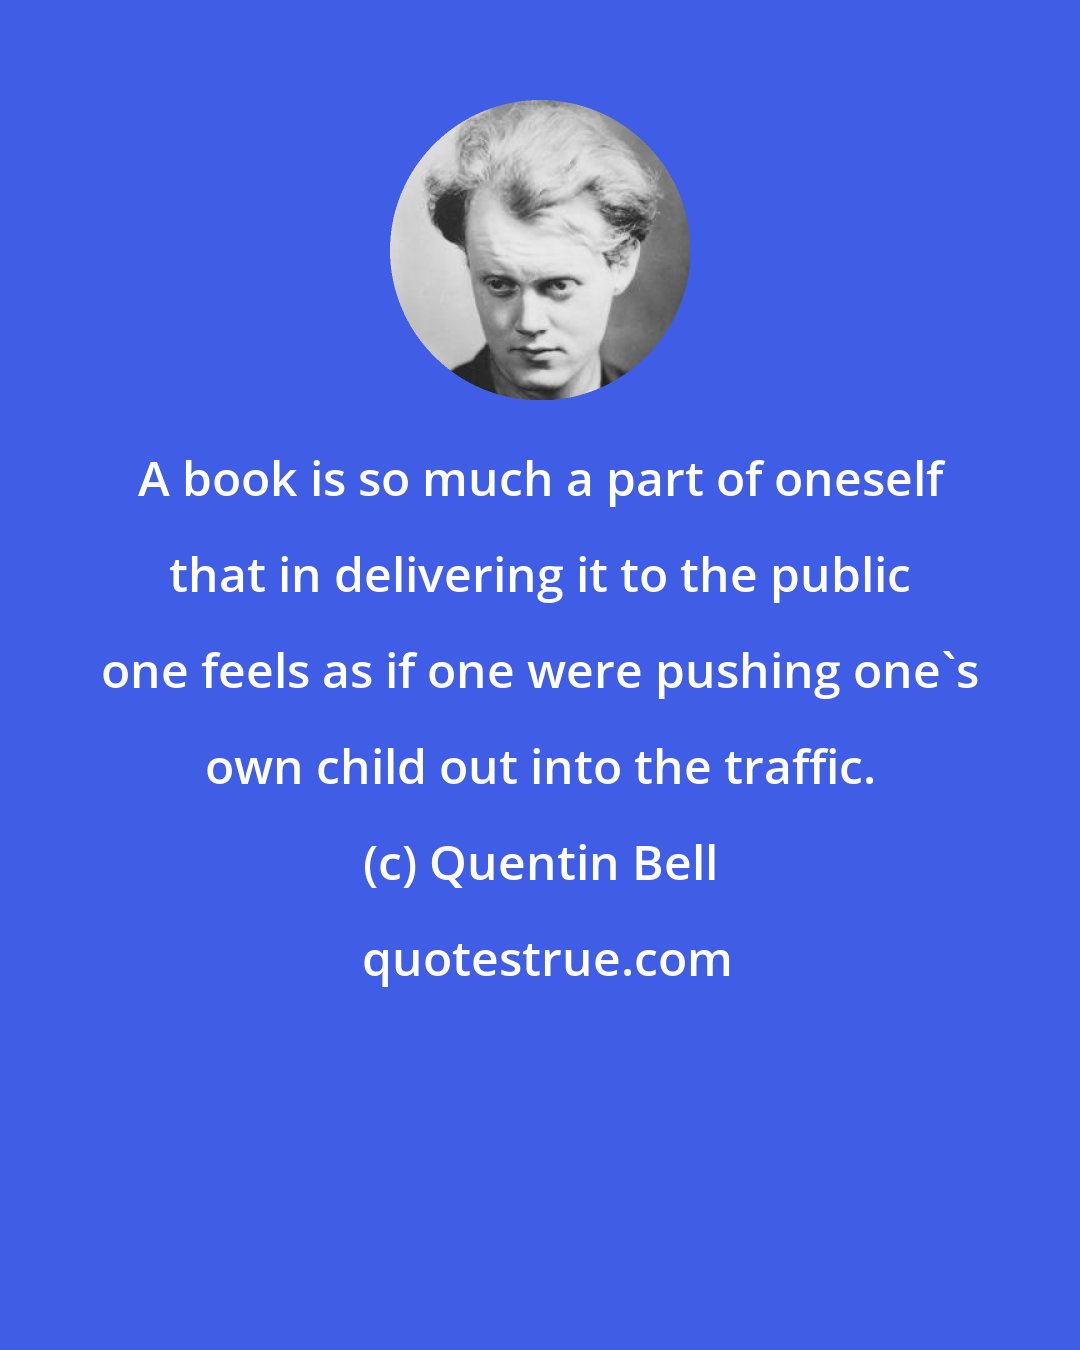 Quentin Bell: A book is so much a part of oneself that in delivering it to the public one feels as if one were pushing one's own child out into the traffic.